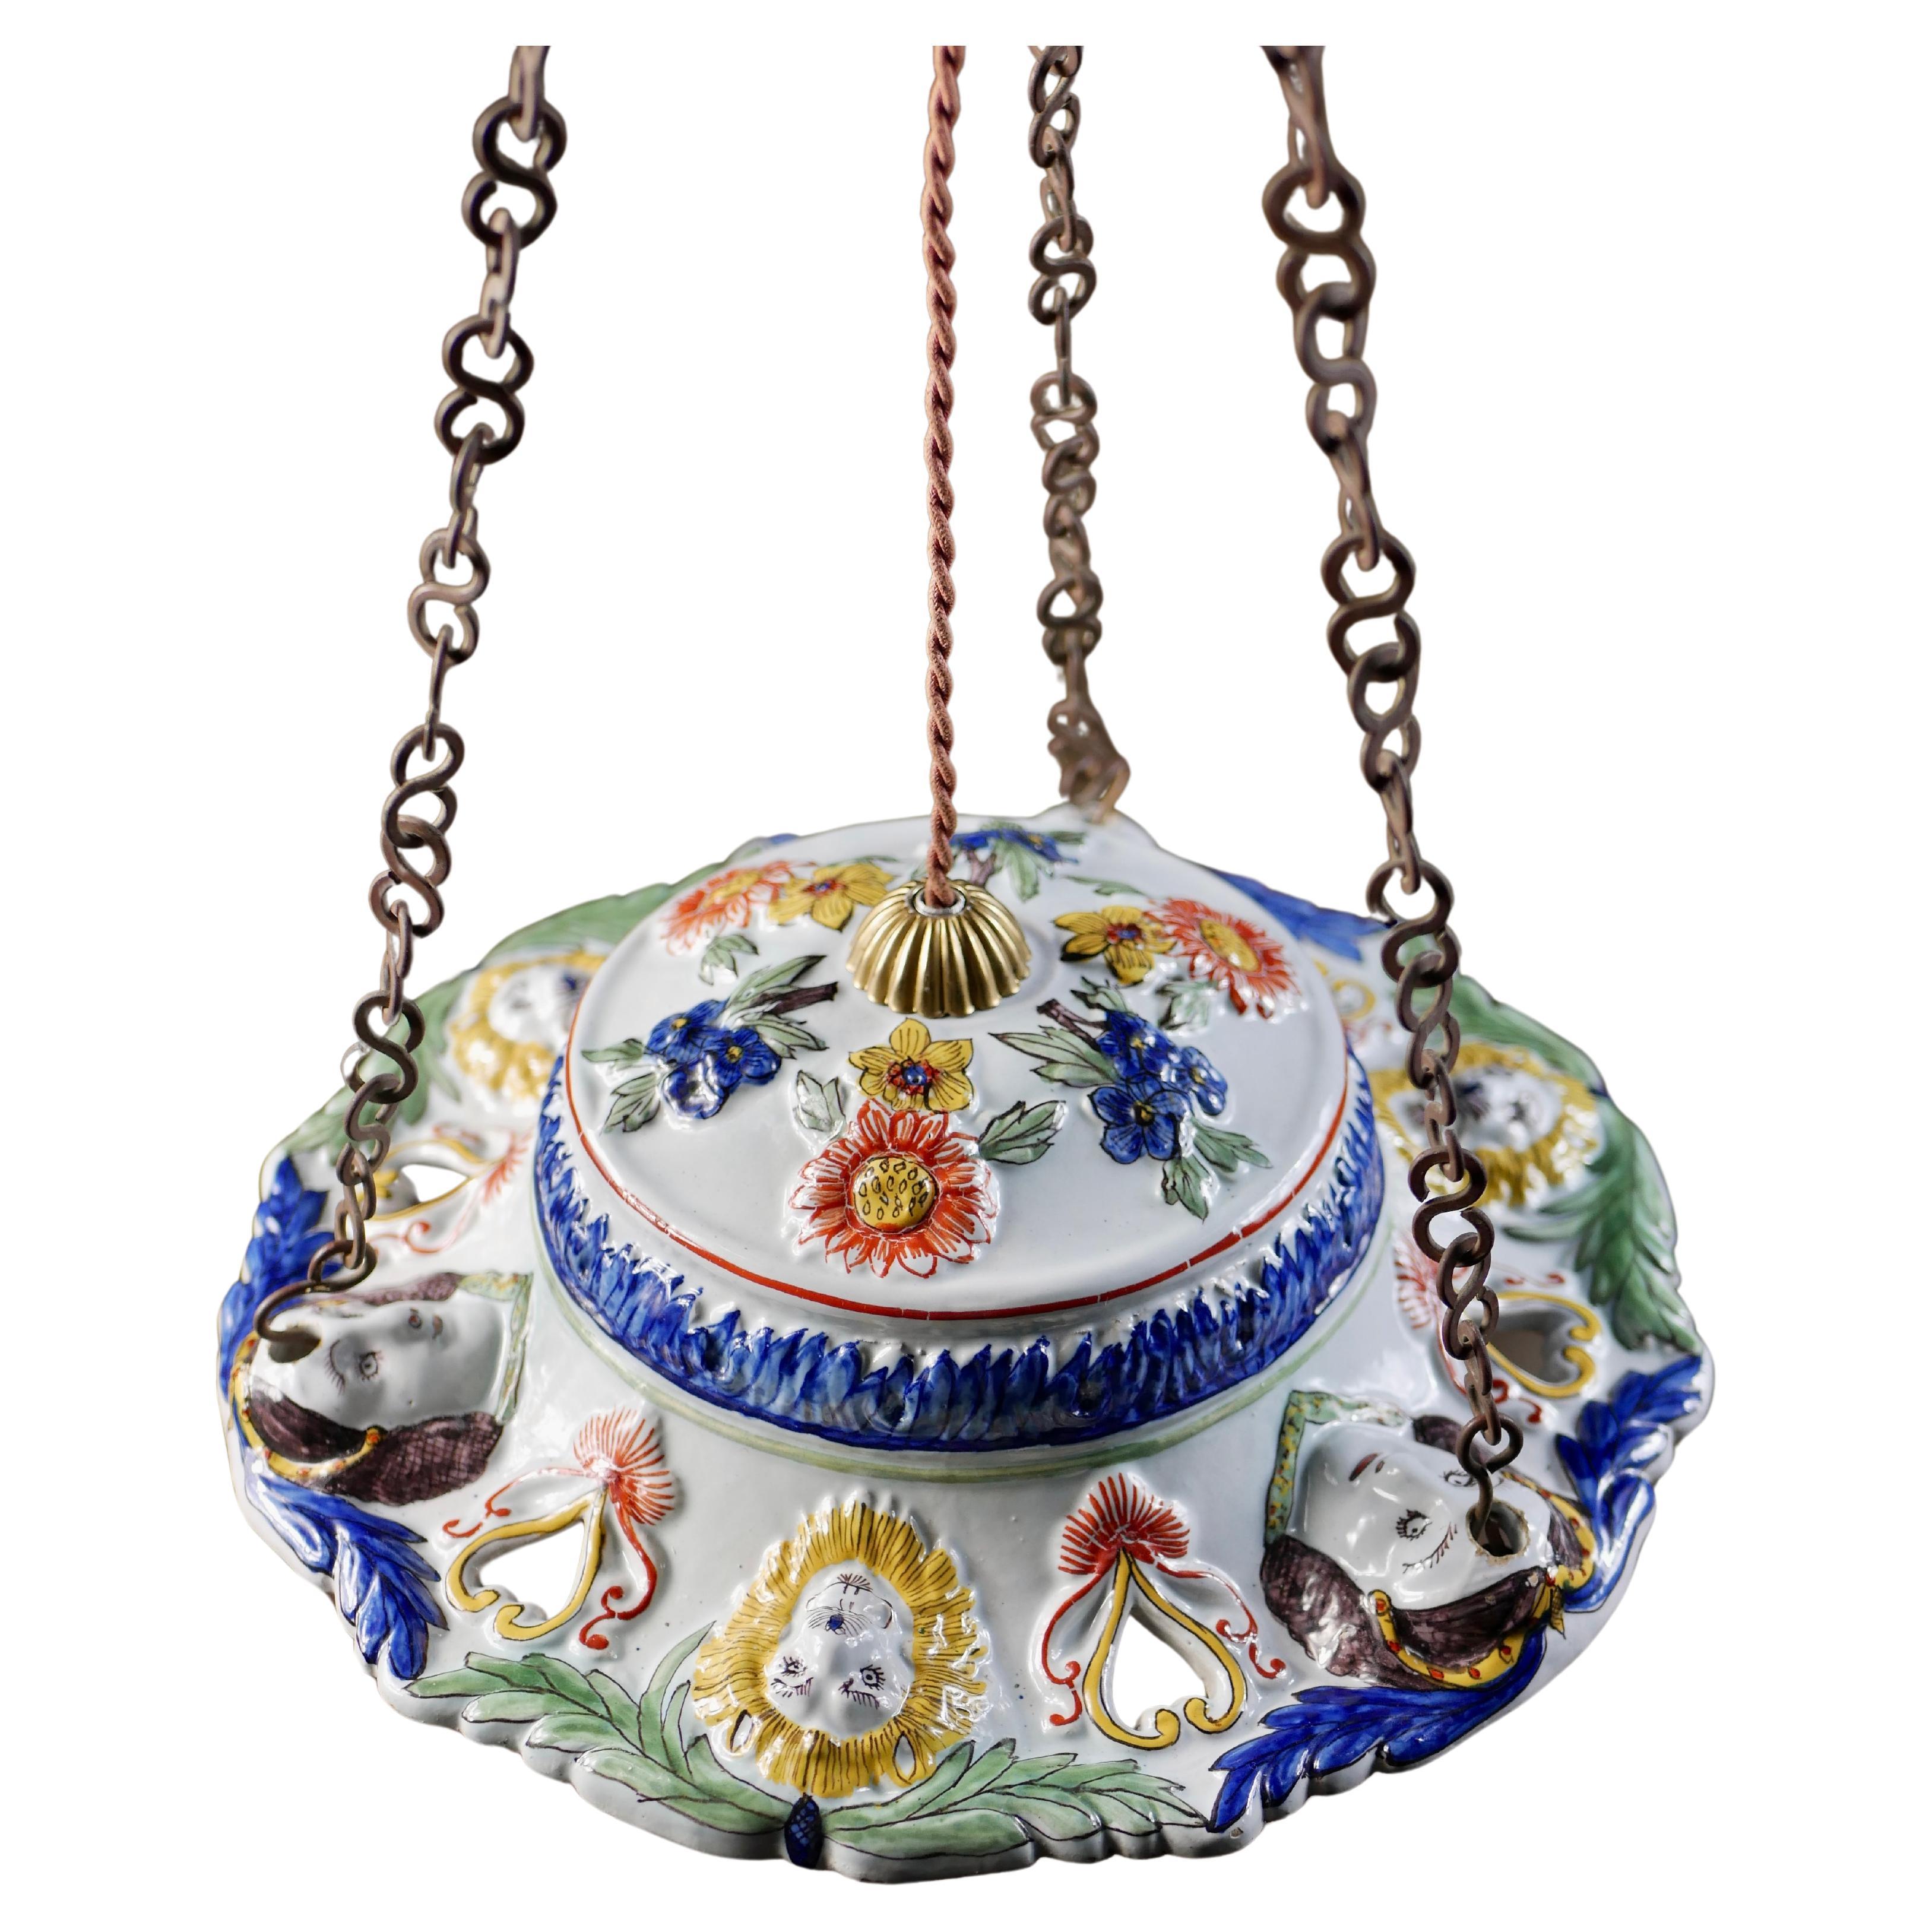 Beautiful and rare former pendant bowl from the late 19th century, made in Sicily, that has been transformed into a chandelier.
Polychrome earthenware with flowers, woman and lion faces decorations that have been hand-painted and are absolutely